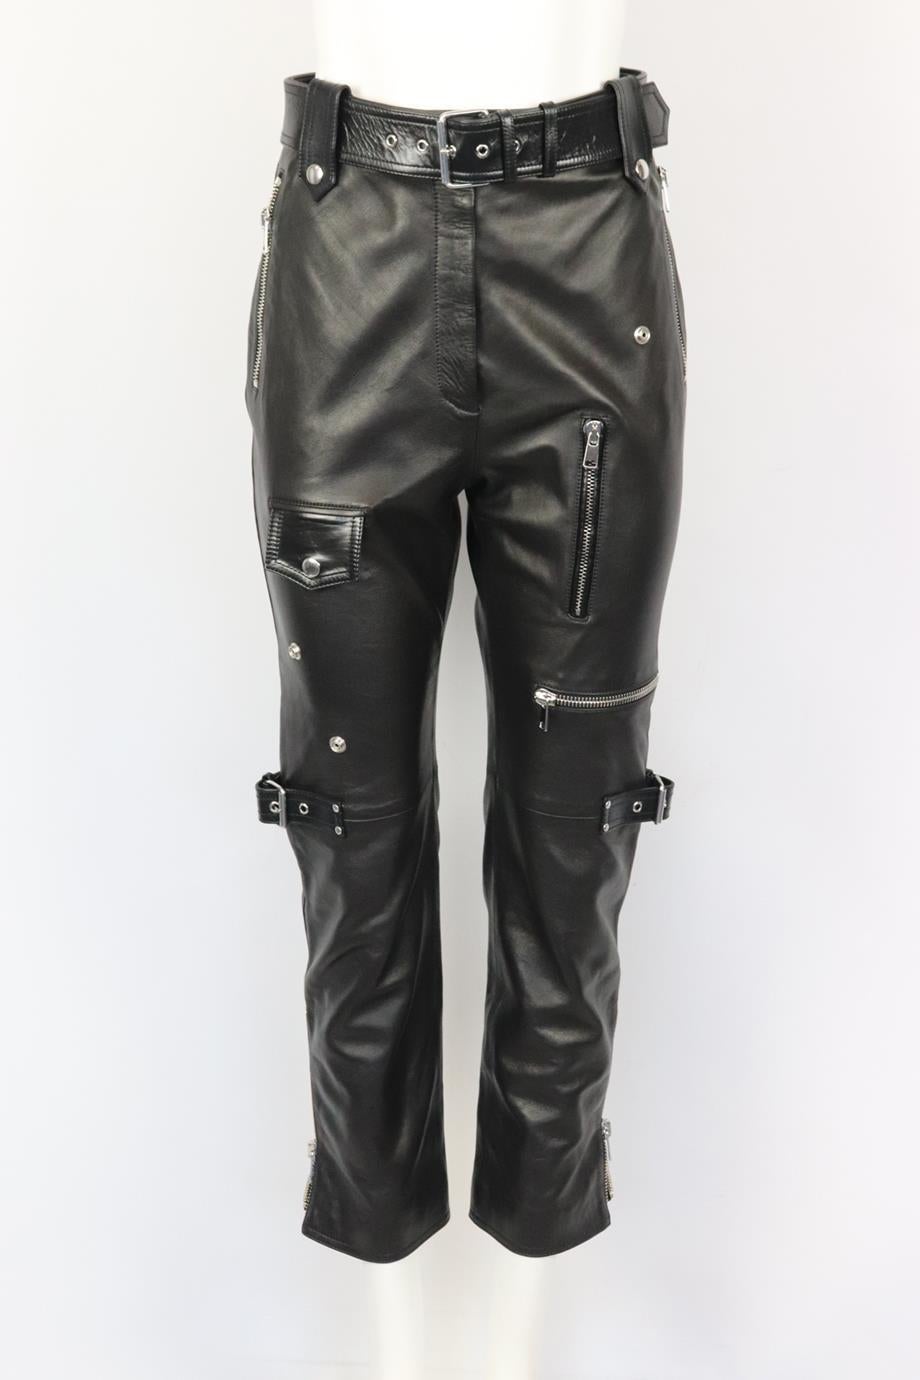 Alexander McQueen belted zip detailed leather straight leg pants. Black. Hook, eye and zip fastening at front. 100% Leather; lining: 100% viscose. Size: IT 42 (UK 10, US 6, FR 38). Waist: 27.4 in. Hips: 35.6 in. Length: 39.3 in. Inseam: 26 in. Rise: